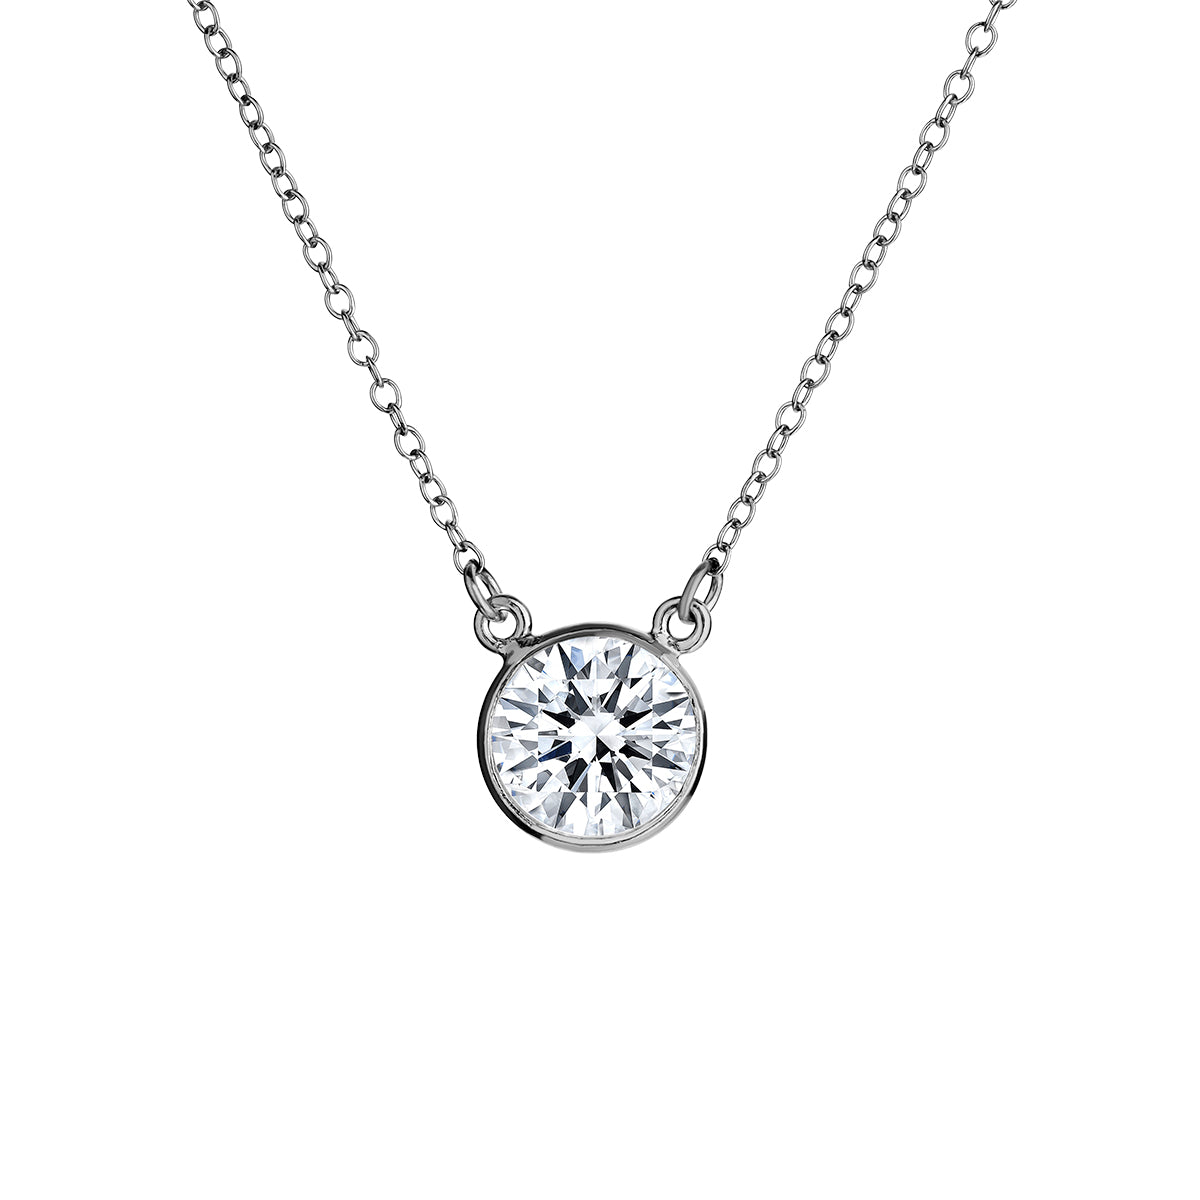 3.11 Carat Genuine White Topaz "Eclipse" Pendant,  Sterling Silver.  Necklaces and Pendants. Griffin Jewellery Designs. 